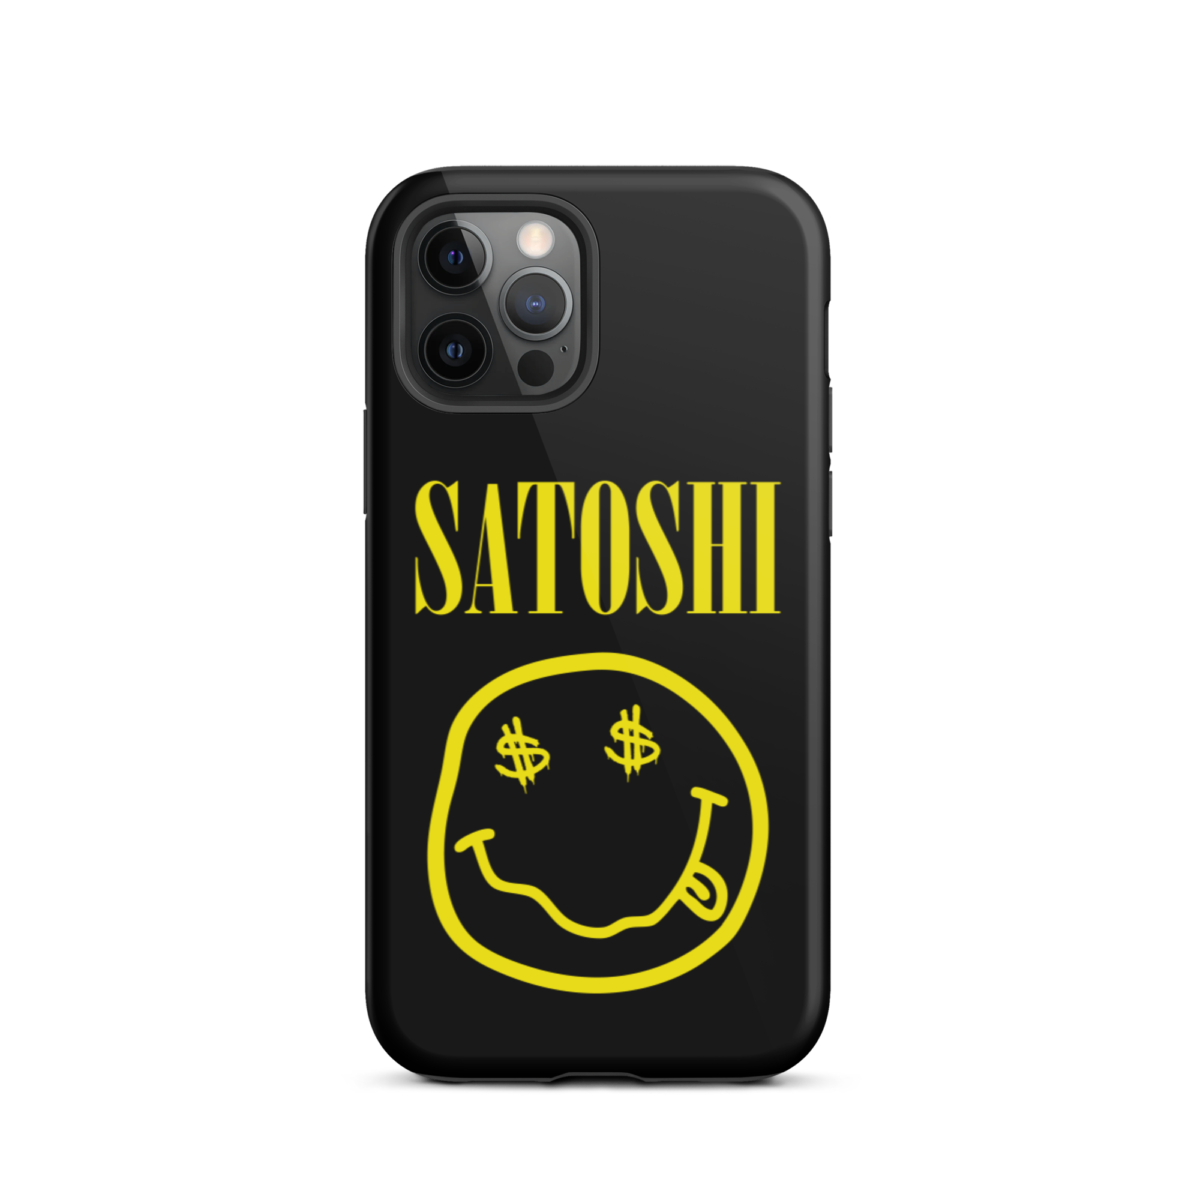 tough iphone case glossy iphone 12 pro front 6397c1799e91a - Satoshi YLW Tough iPhone Case